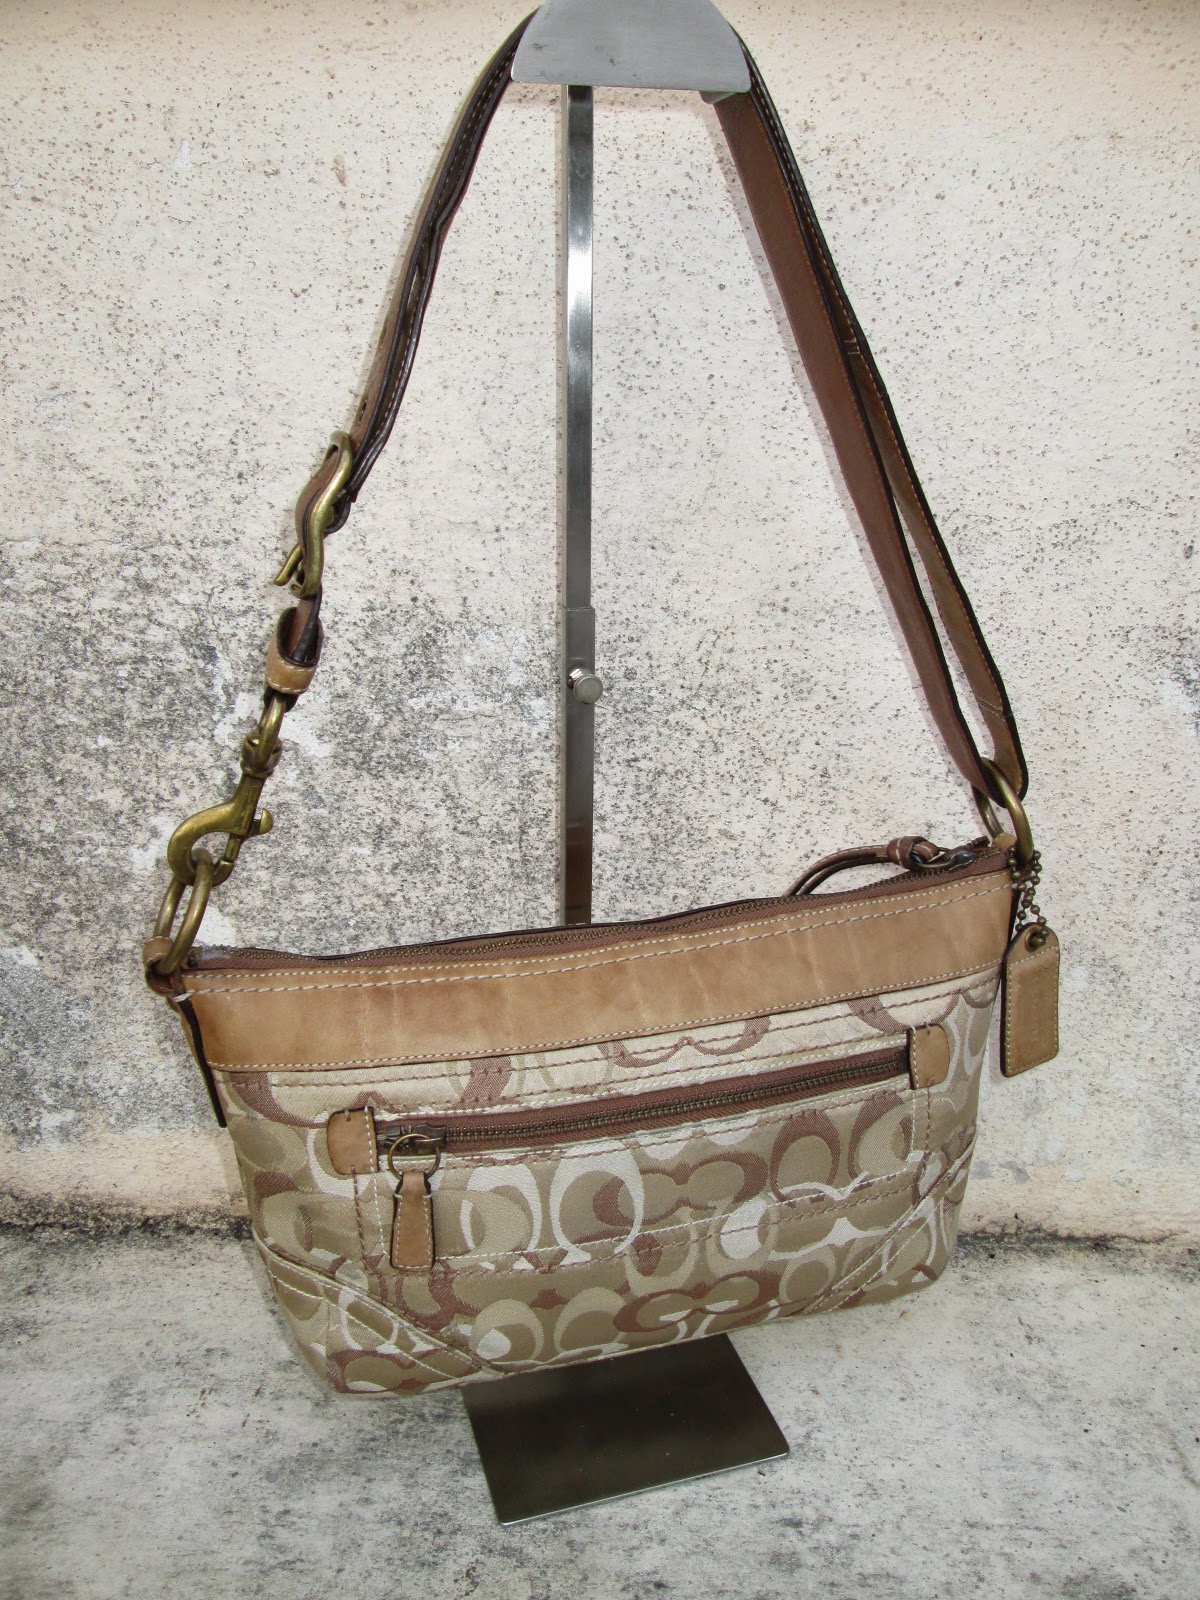 d0rayakEEbaG: Authentic Coach Signature Shoulder Bag(SOLD)